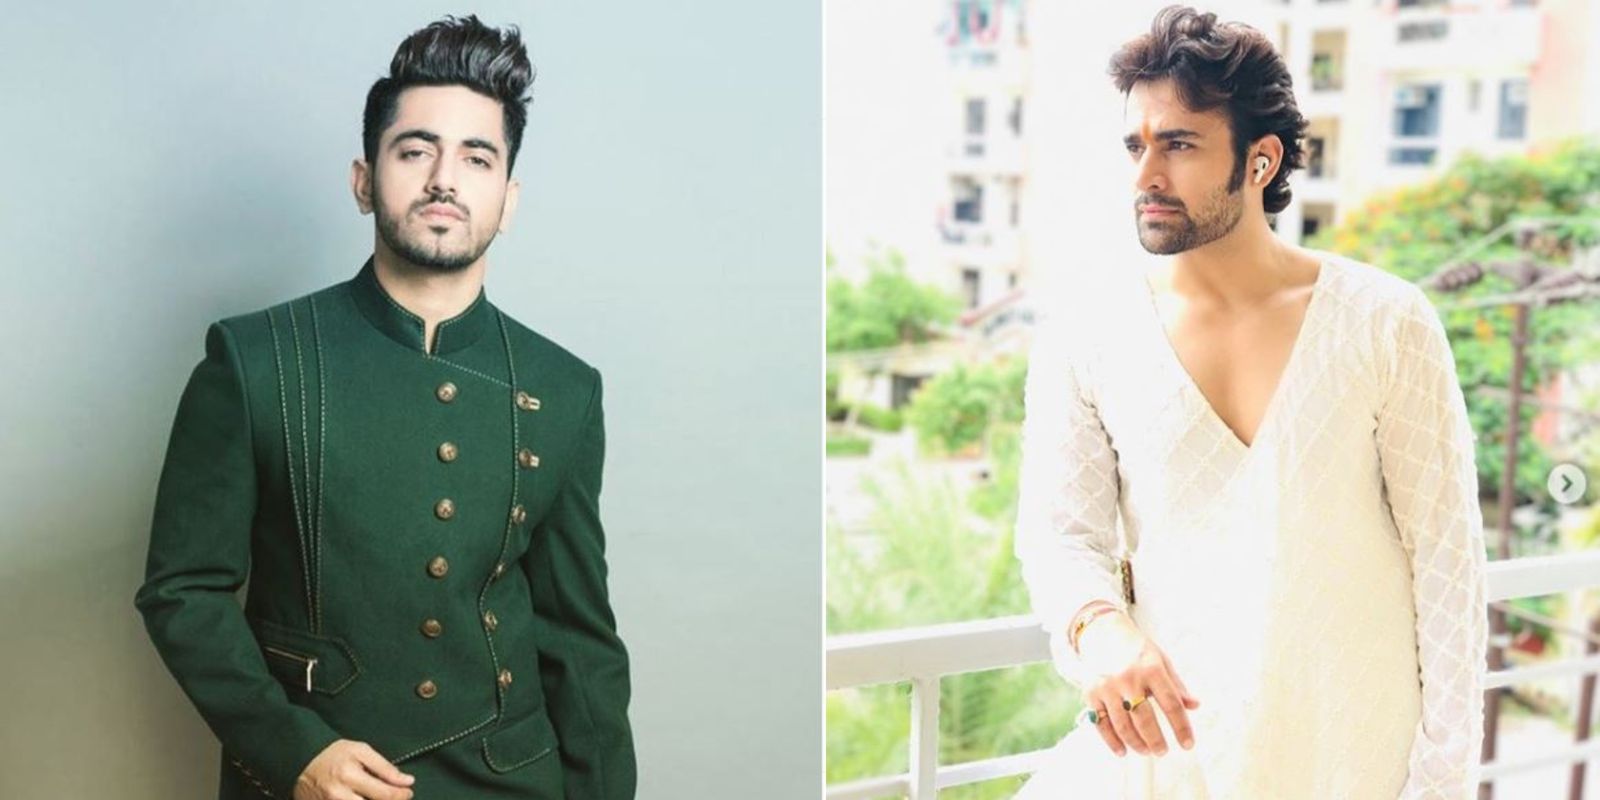 Bigg Boss 14: Pearl V Puri Offered A Whopping Rs. 5 Crores, Zain Imam Refuses To Be A Part Of The Reality Show? Read Details...